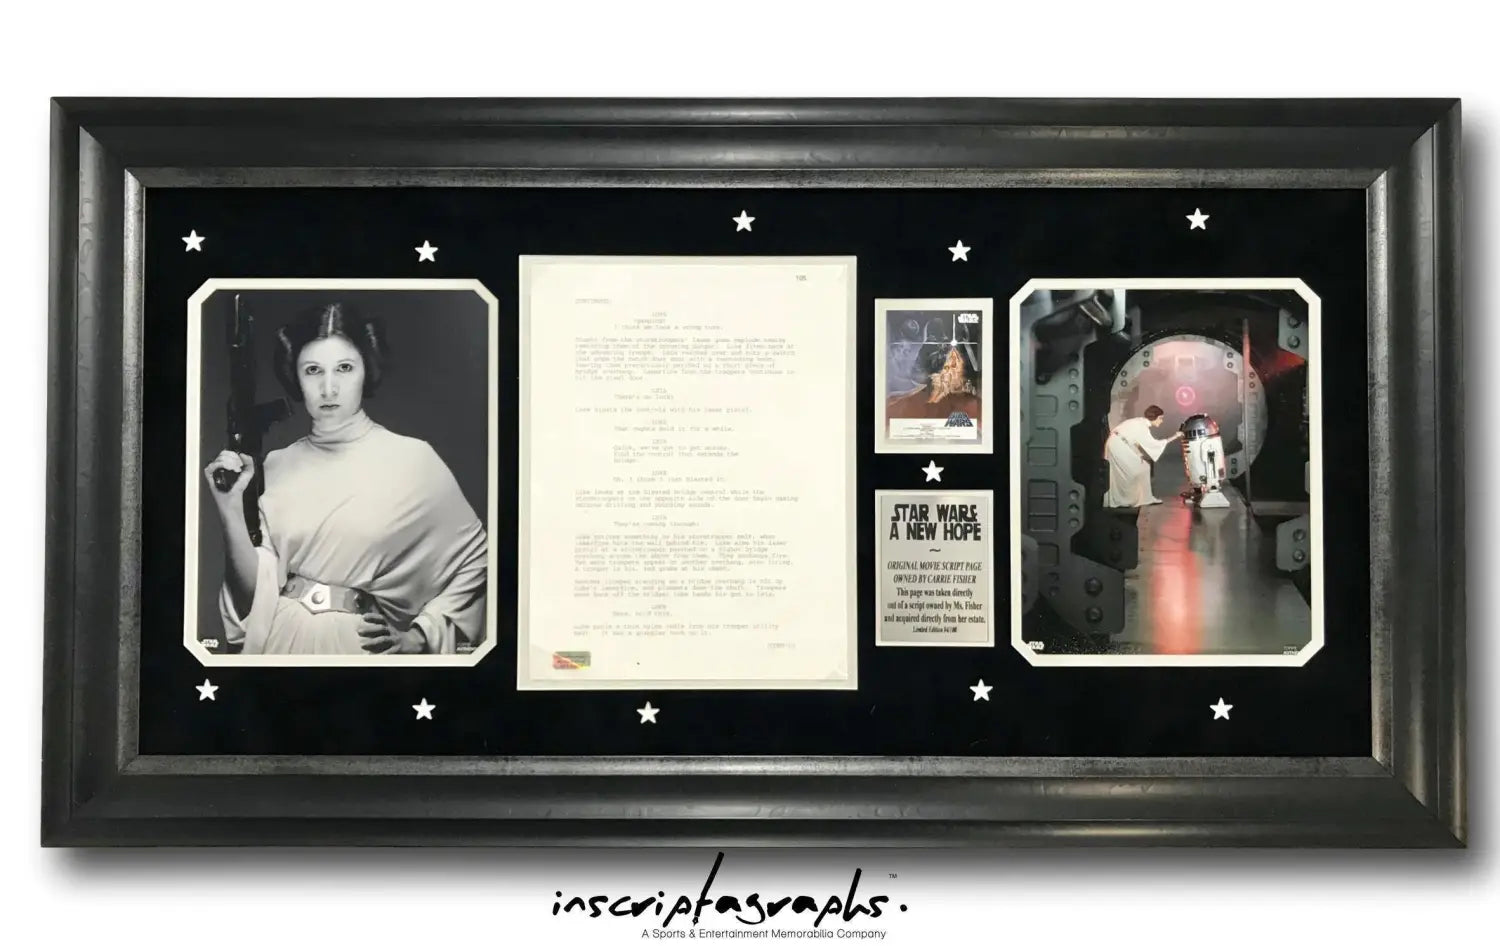 ORIGINAL STAR WARS MOVIE SCRIPT PAGES OWNED BY CARRIE FISHER TO BE SOLD ON MAY 4, 2018!